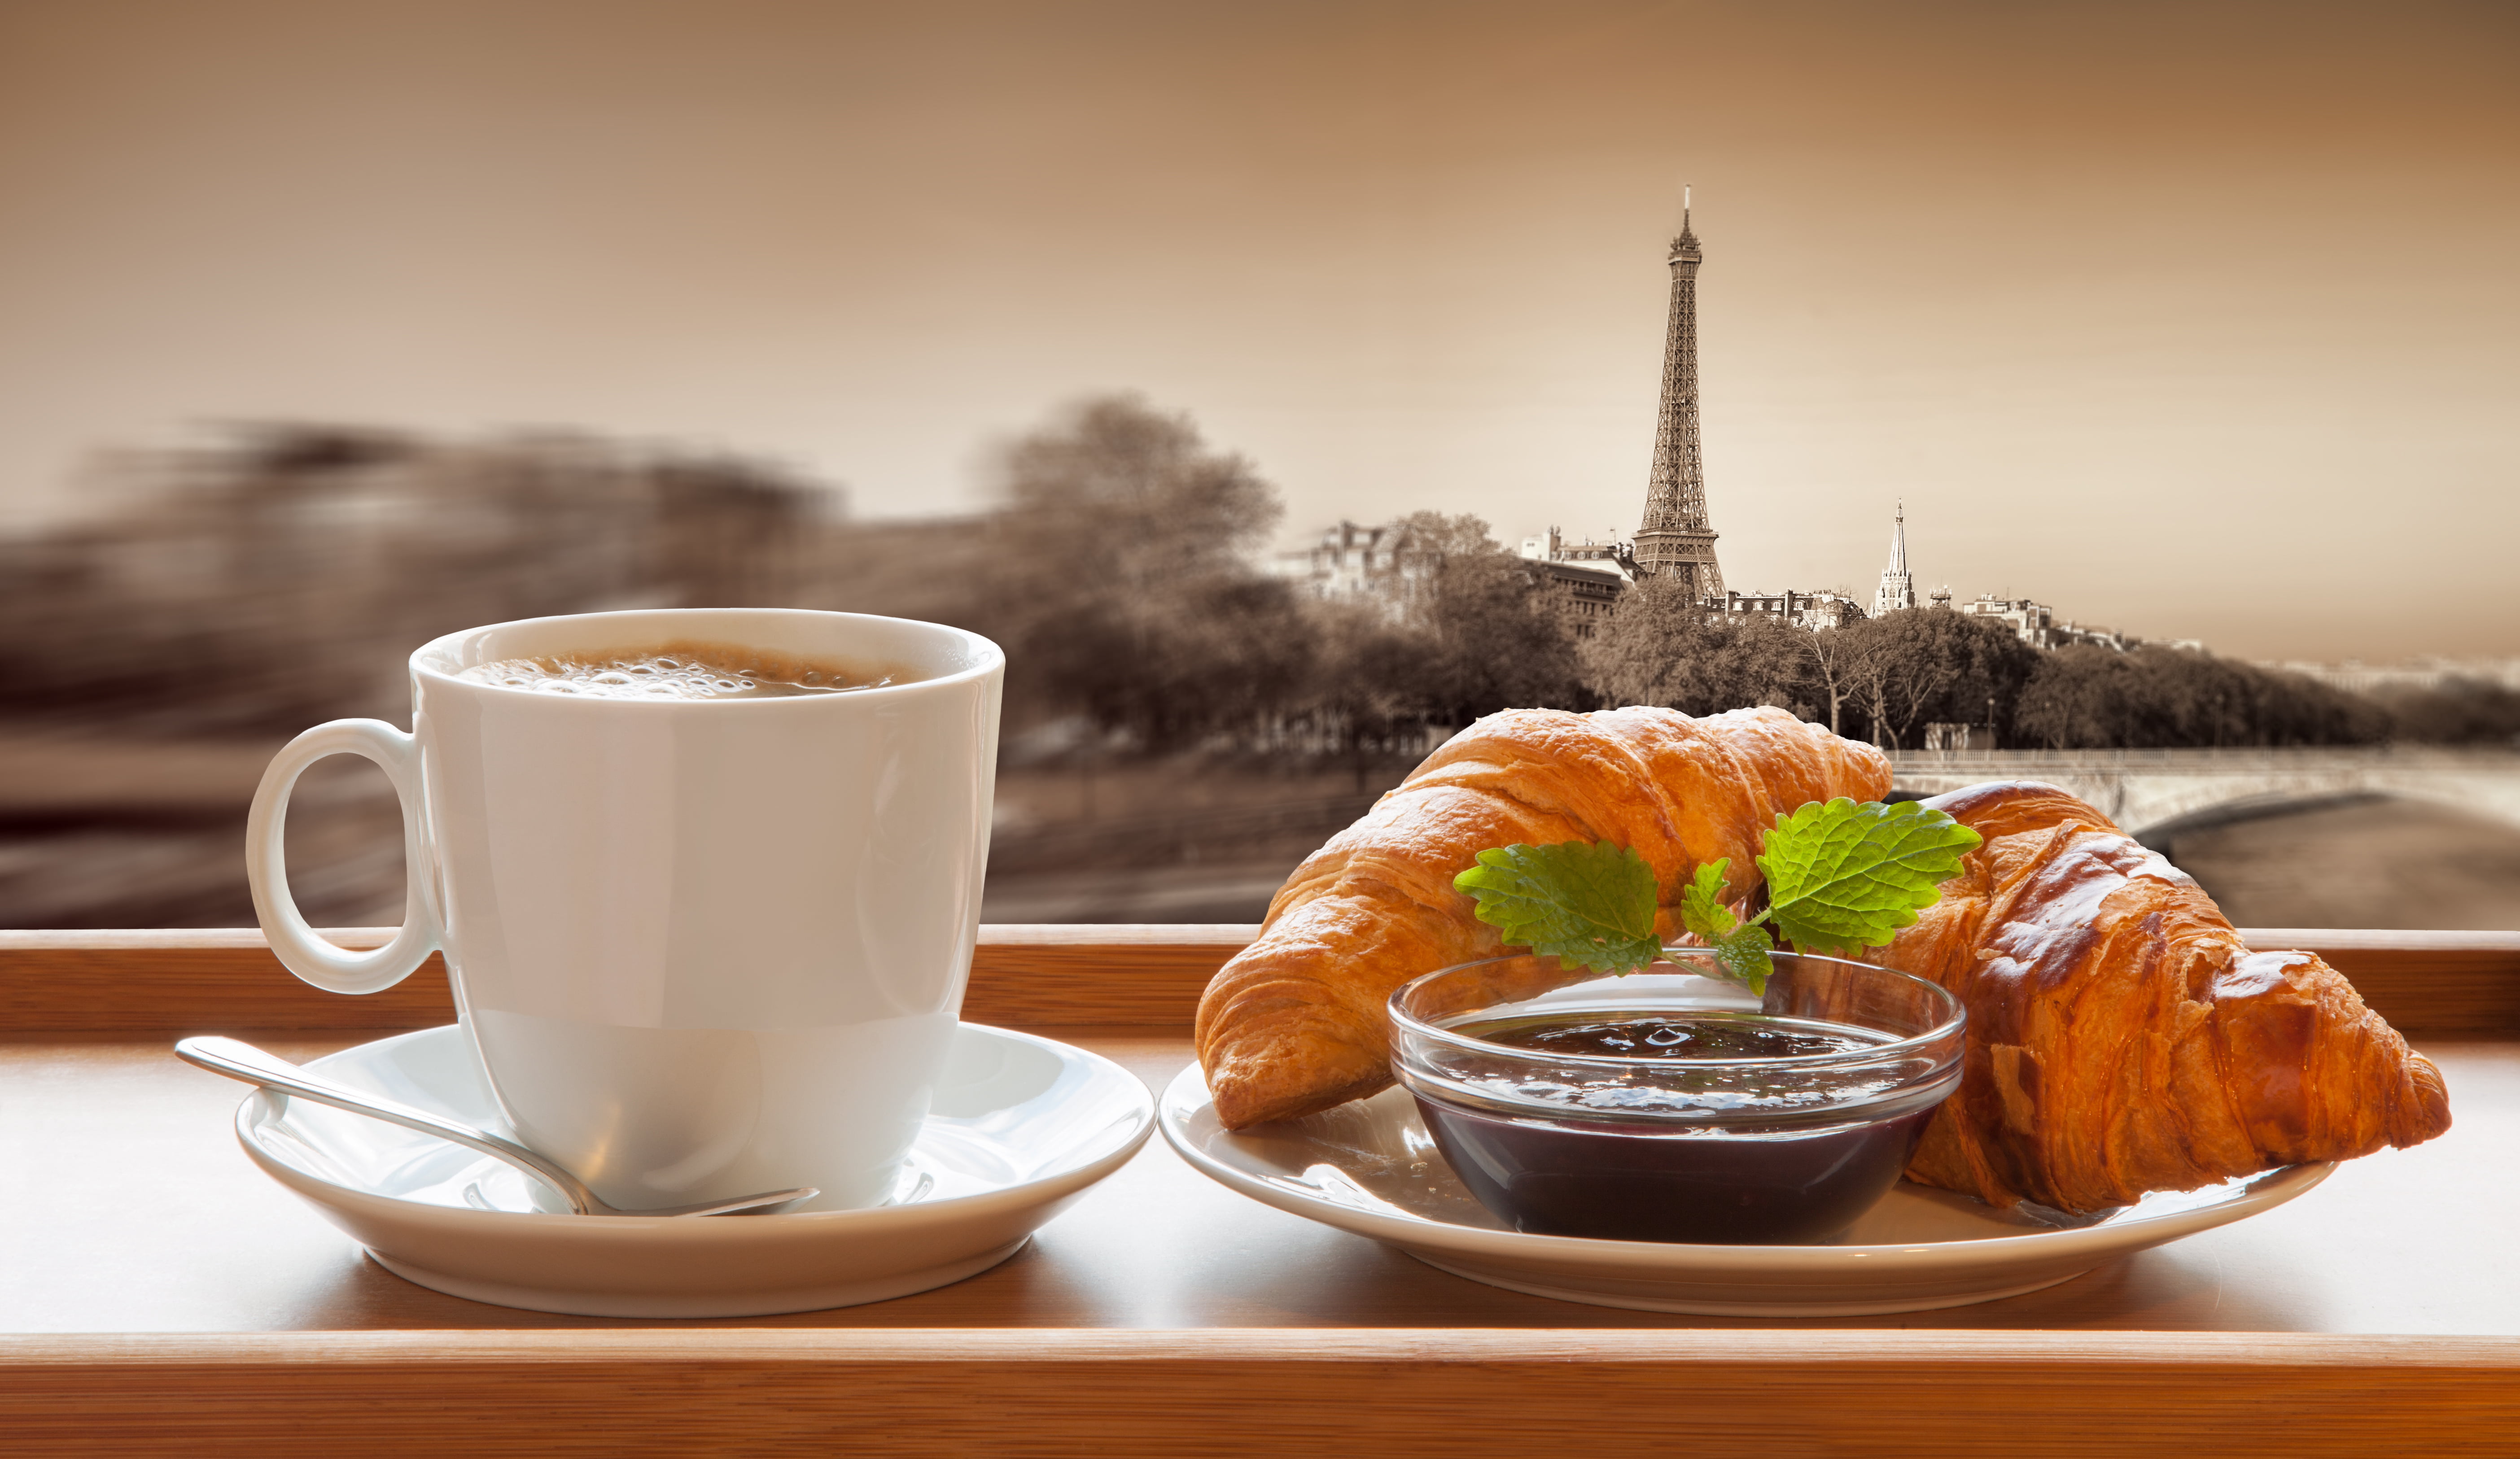 Food, Breakfast, Chocolate, Coffee, Croissant, Cup, France